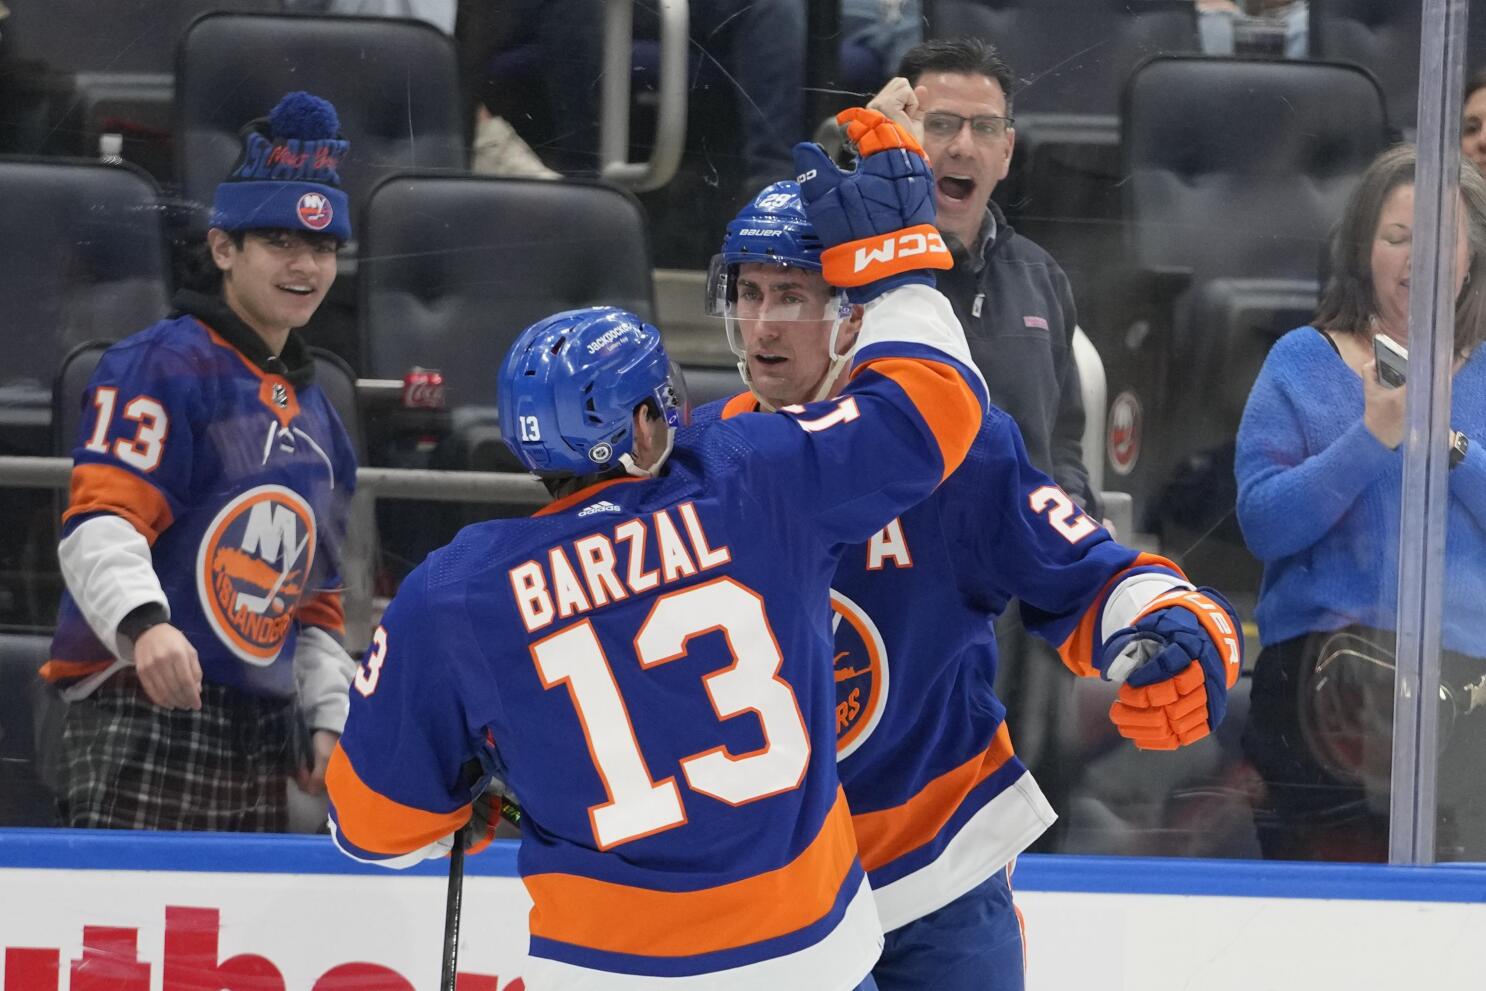 New York Islanders: From the Hunters to the Hunted - The Hockey News